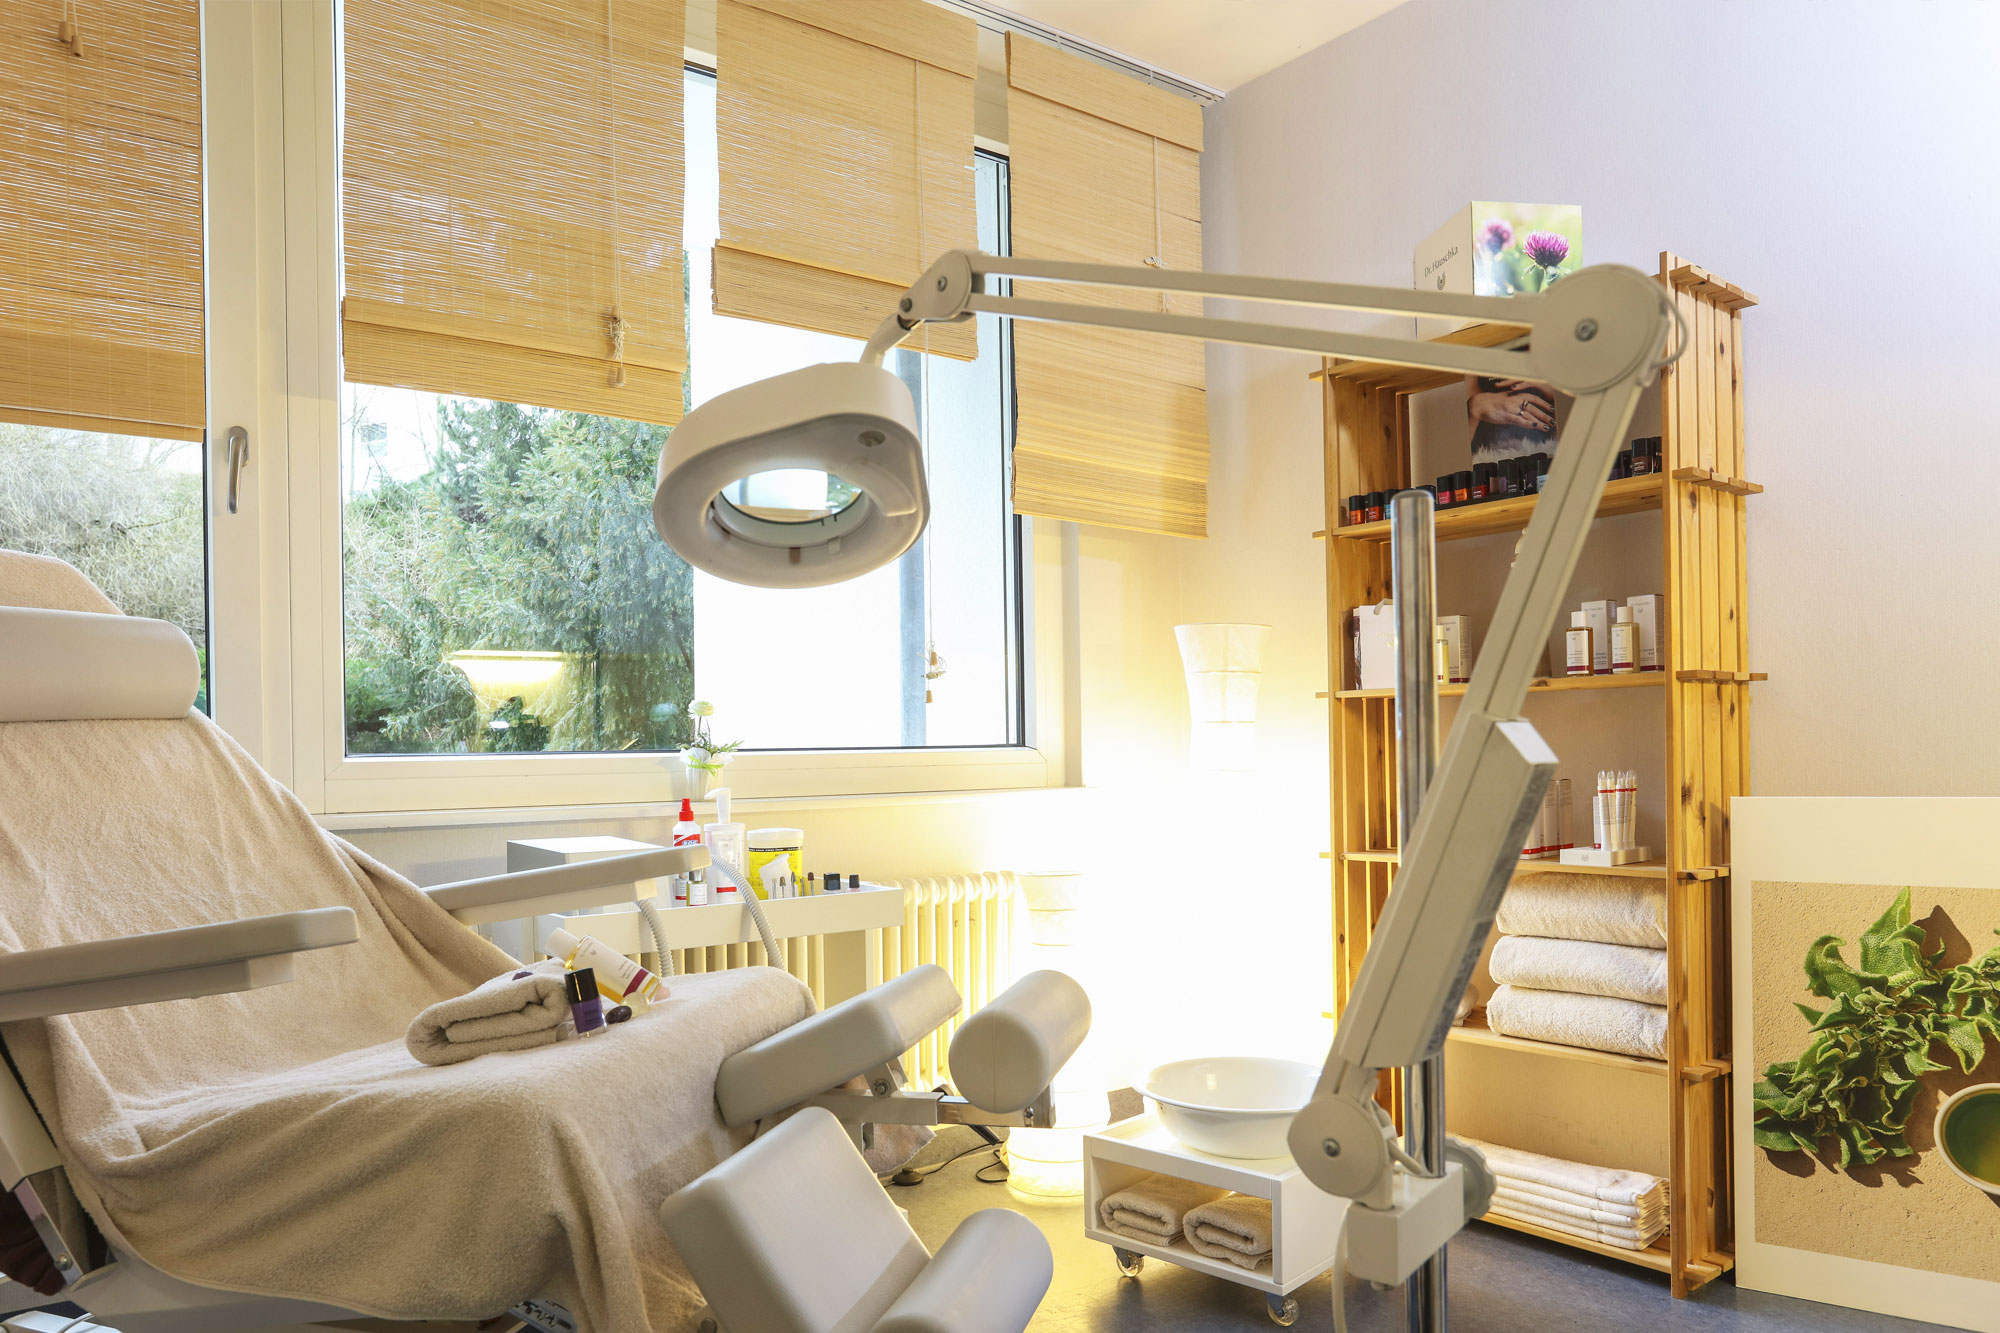 Treatment room in the wellness area of the hotel Schwarzwald Panorama with treatment couch and care products